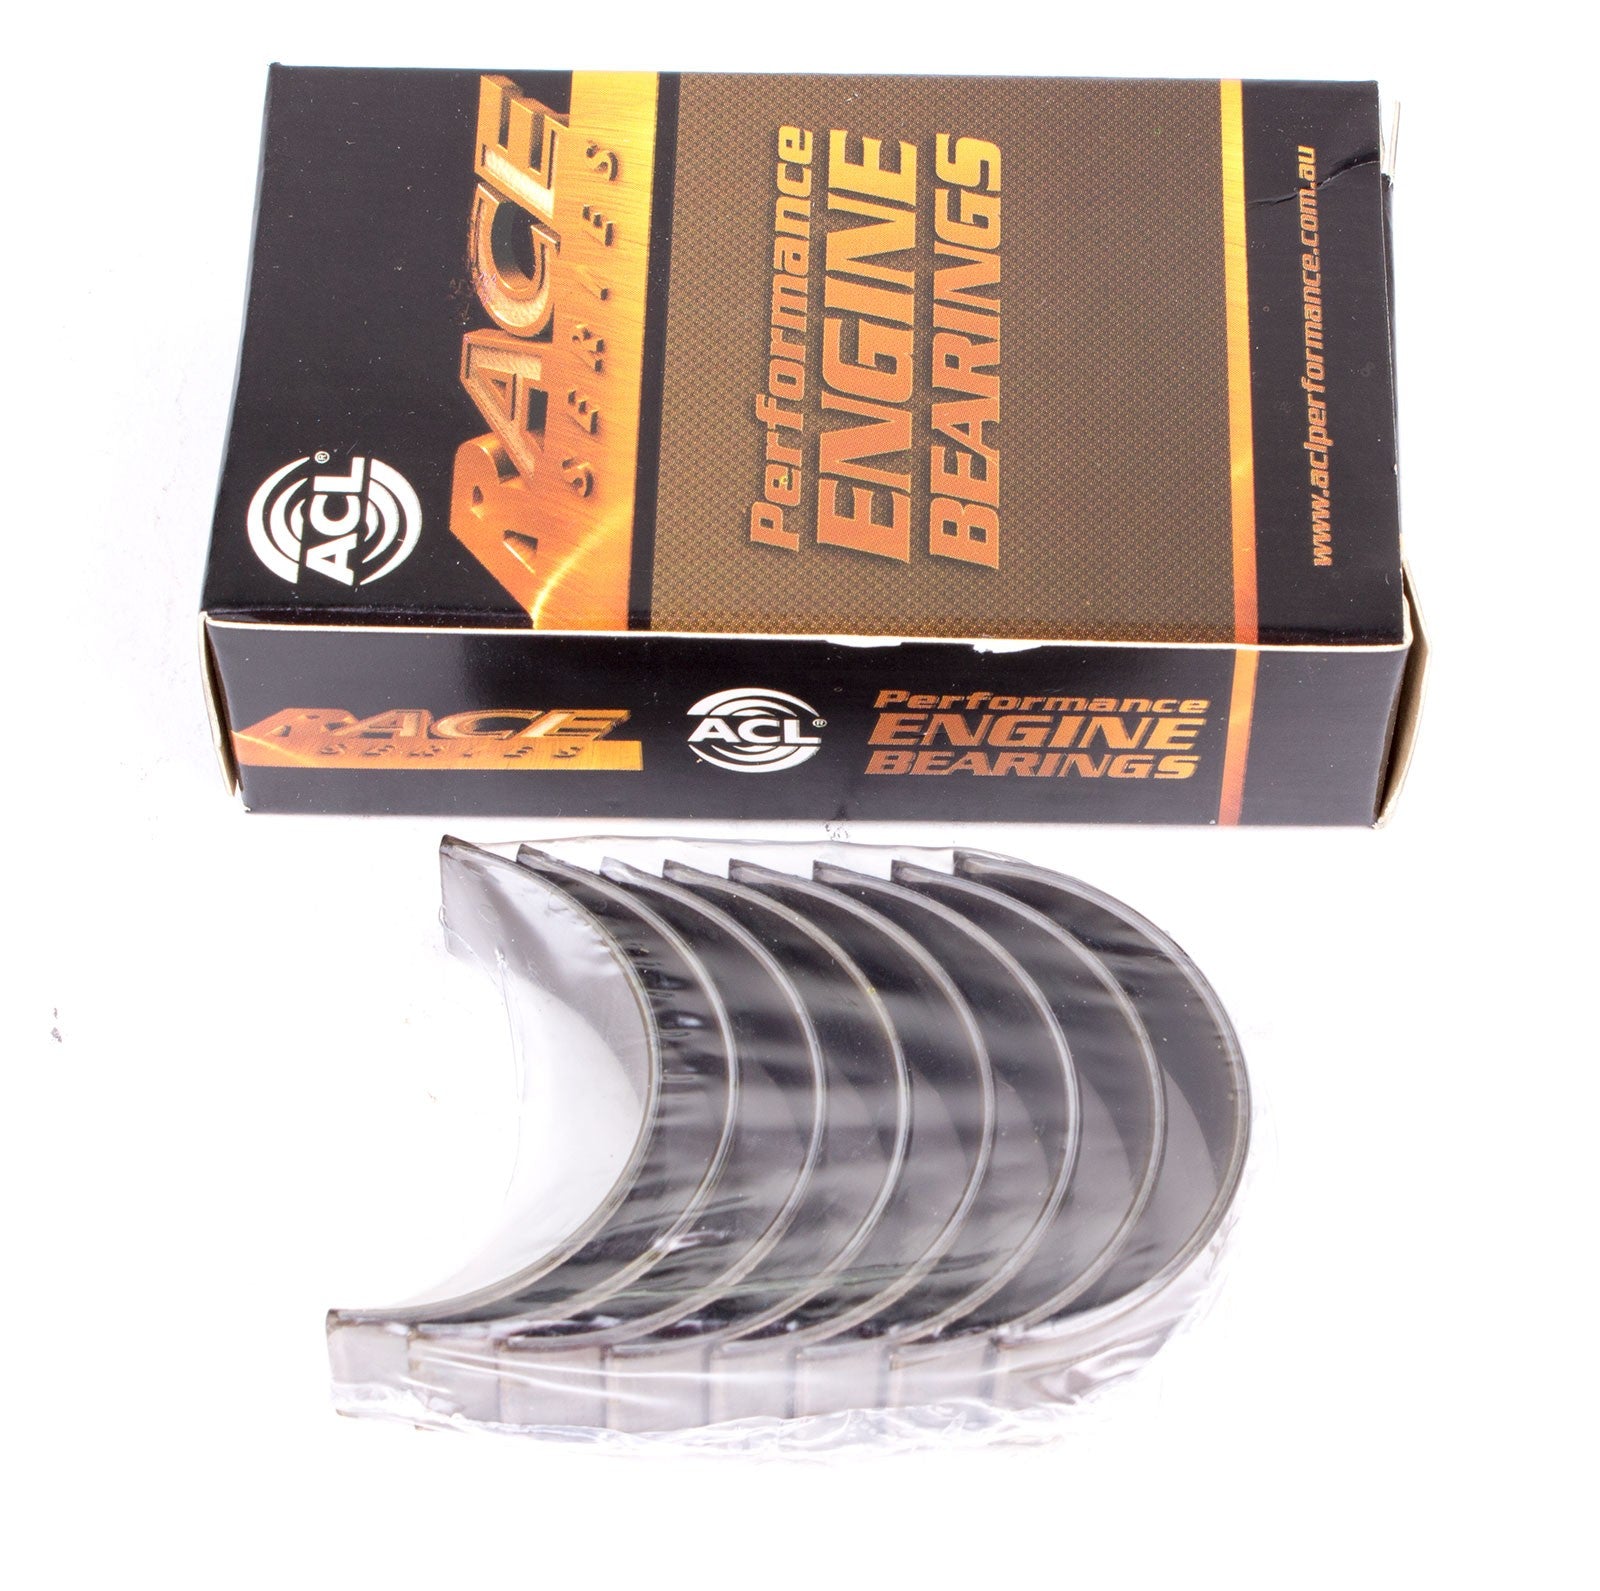 ACL 5M2327H-.25 Main bearing set (ACL Race Series) Photo-0 